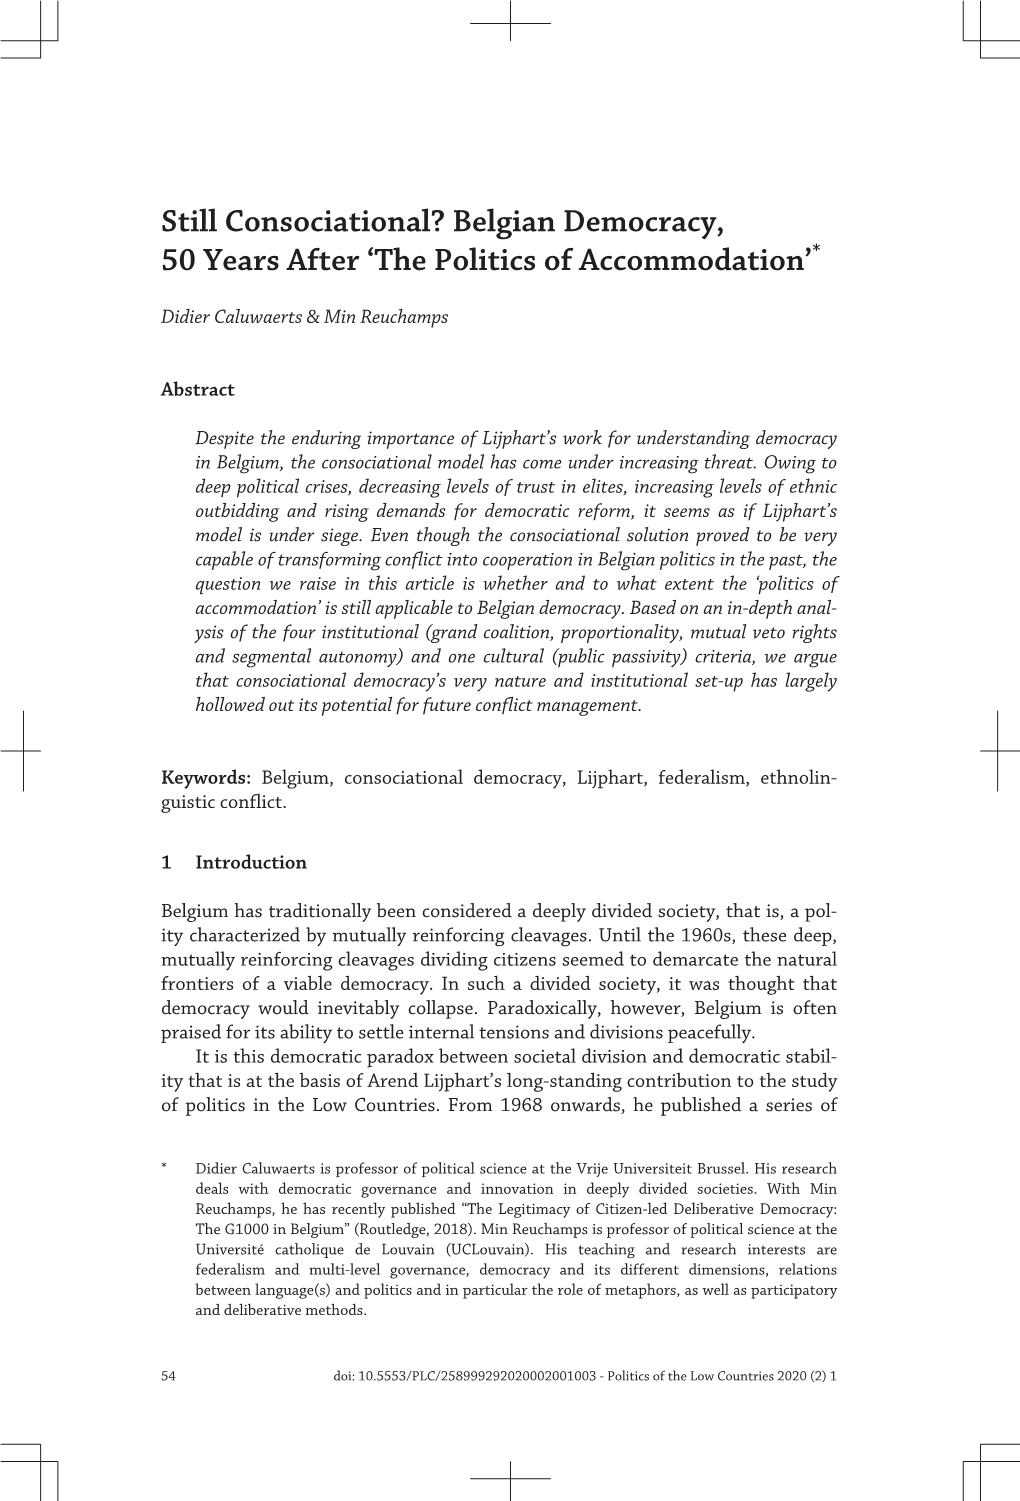 Still Consociational? Belgian Democracy, 50 Years After ‘The Politics of Accommodation’*